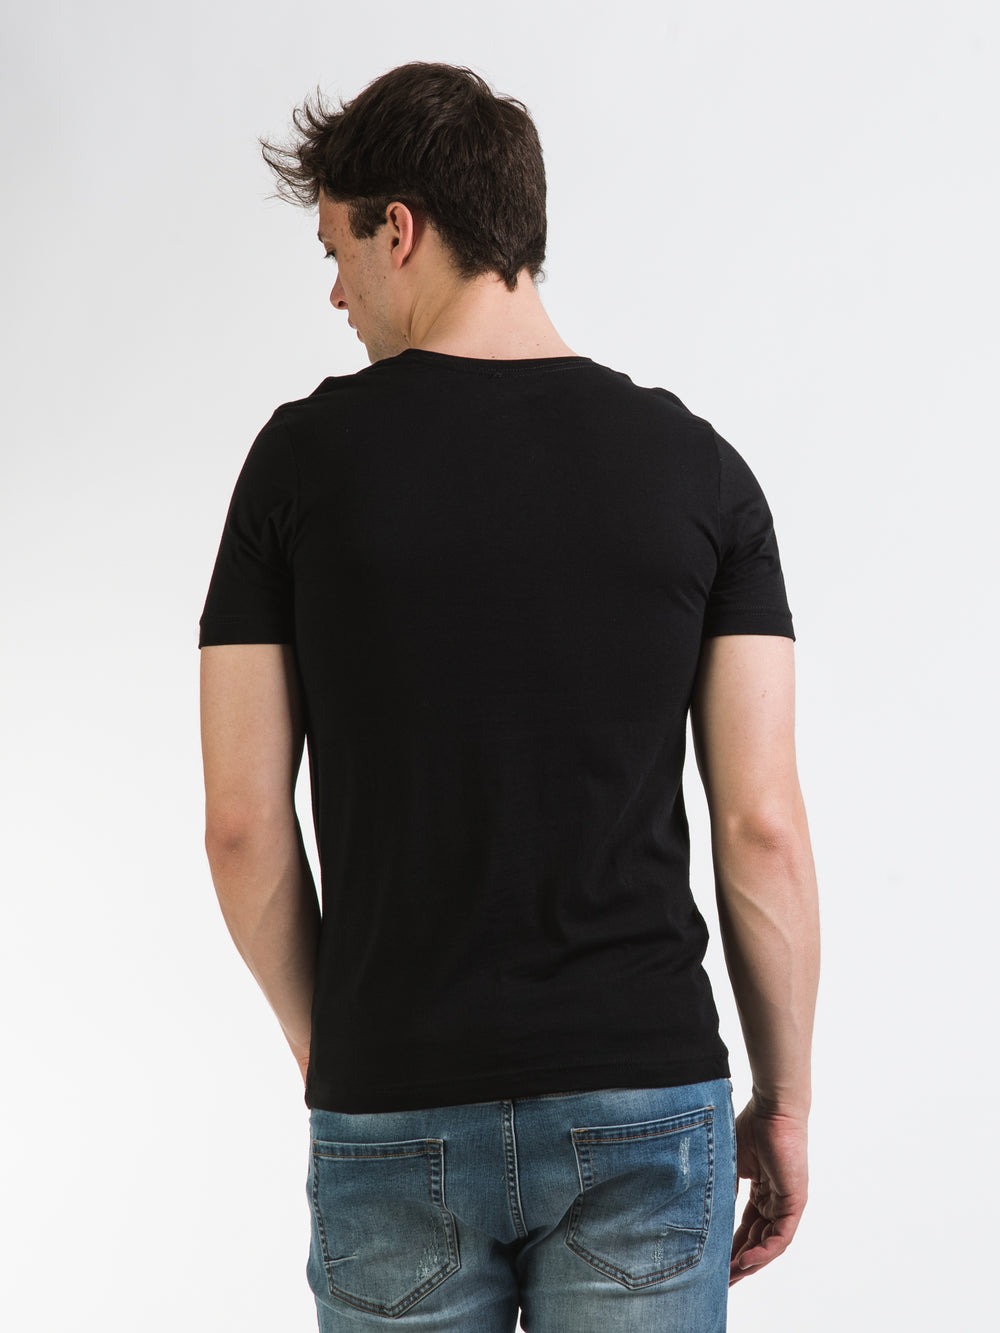 SECTION 35 BLACK CAMO TALKING FEATHER T-SHIRT - CLEARANCE